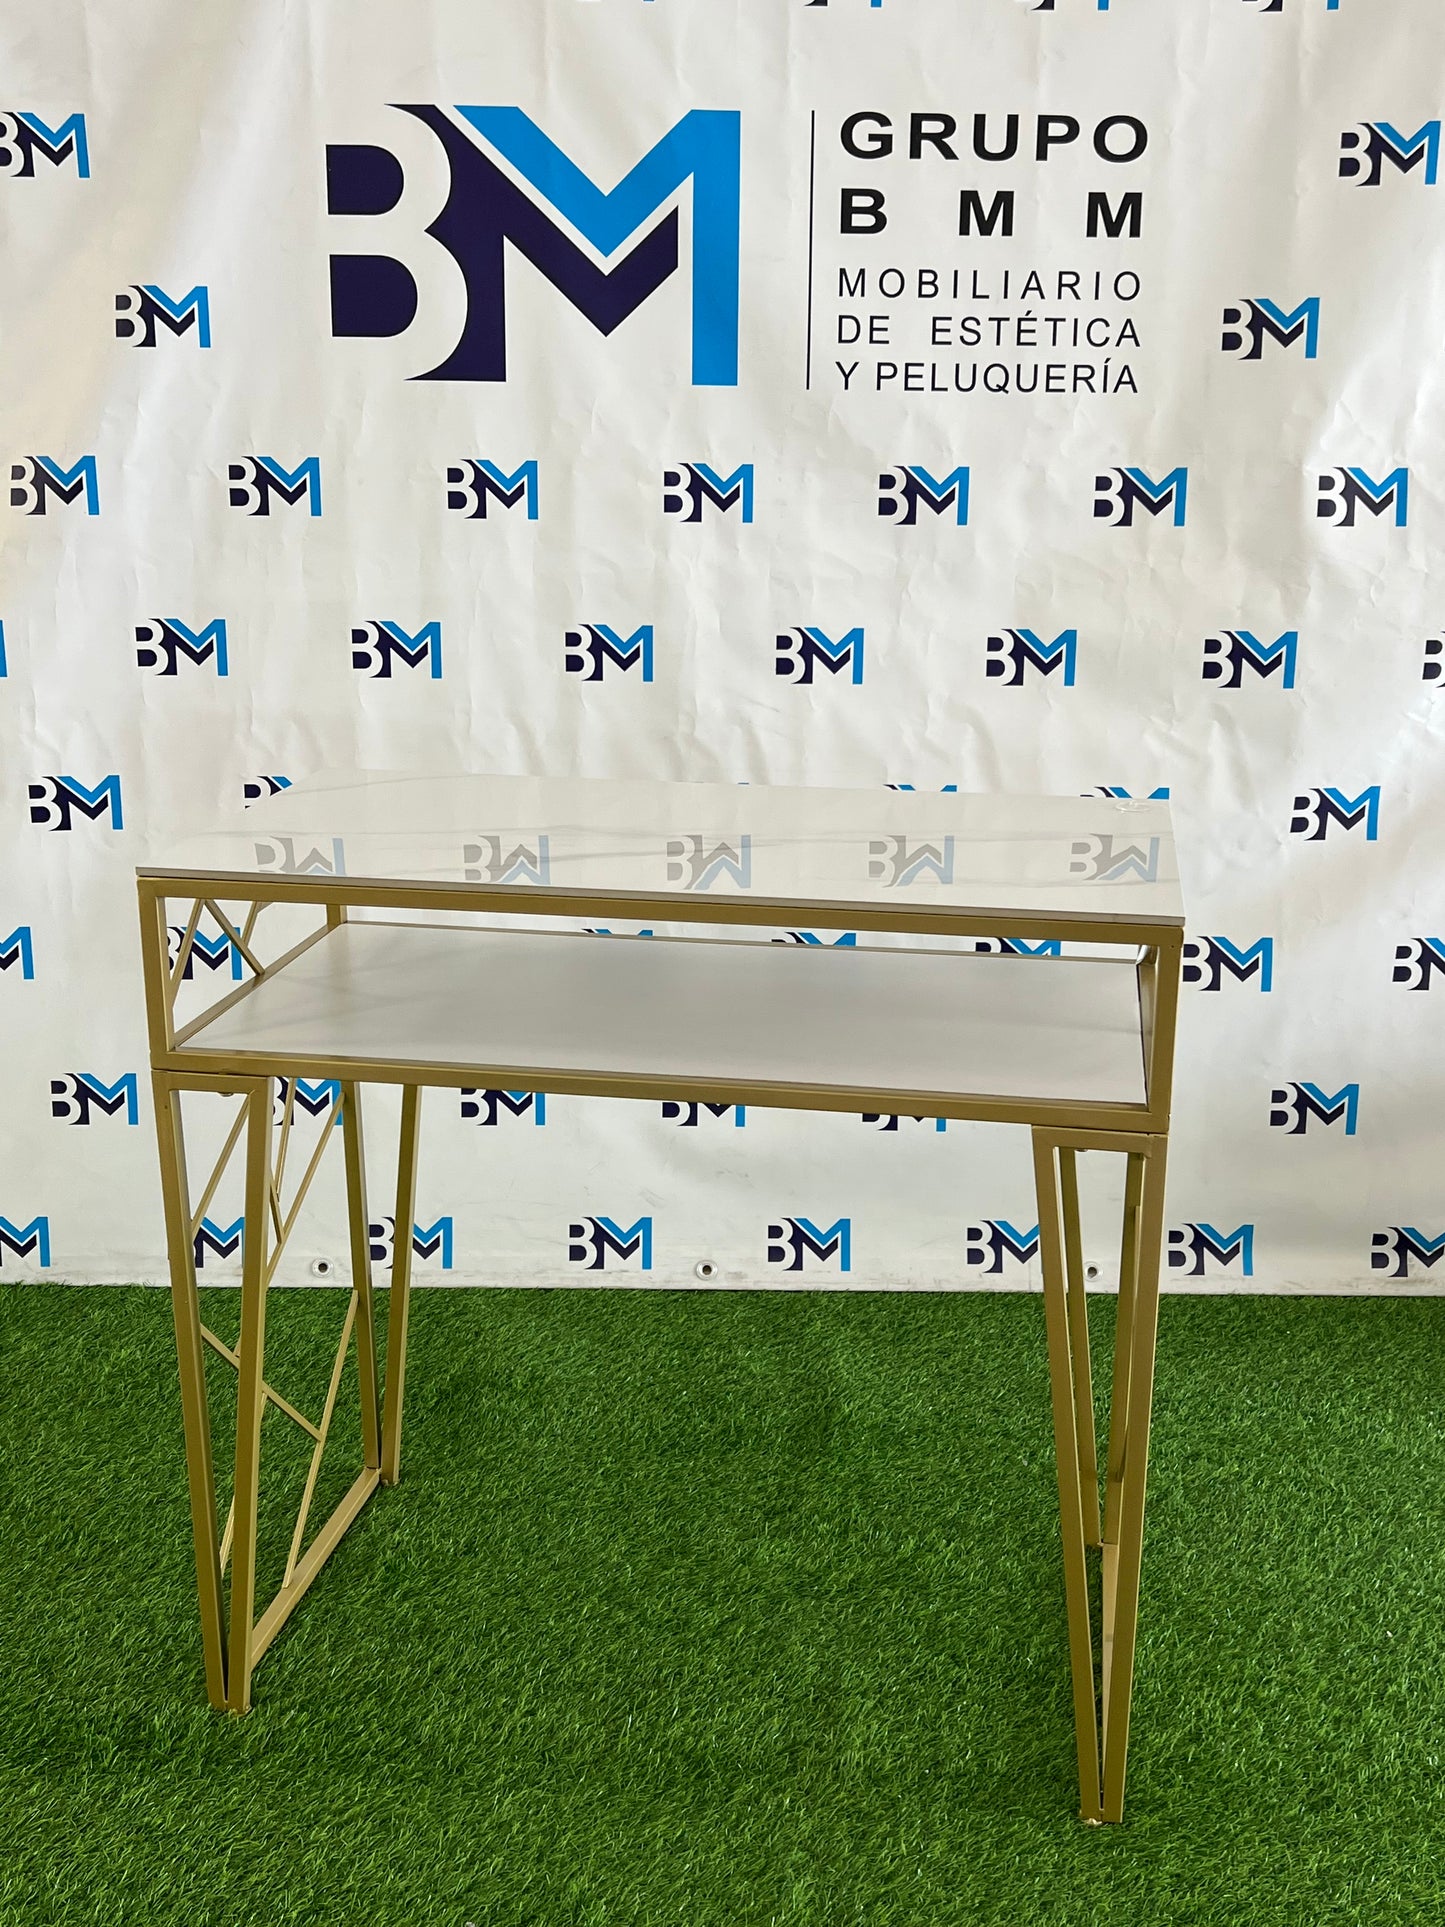 Individual manicure table in gold metal, marble-like stone and wood